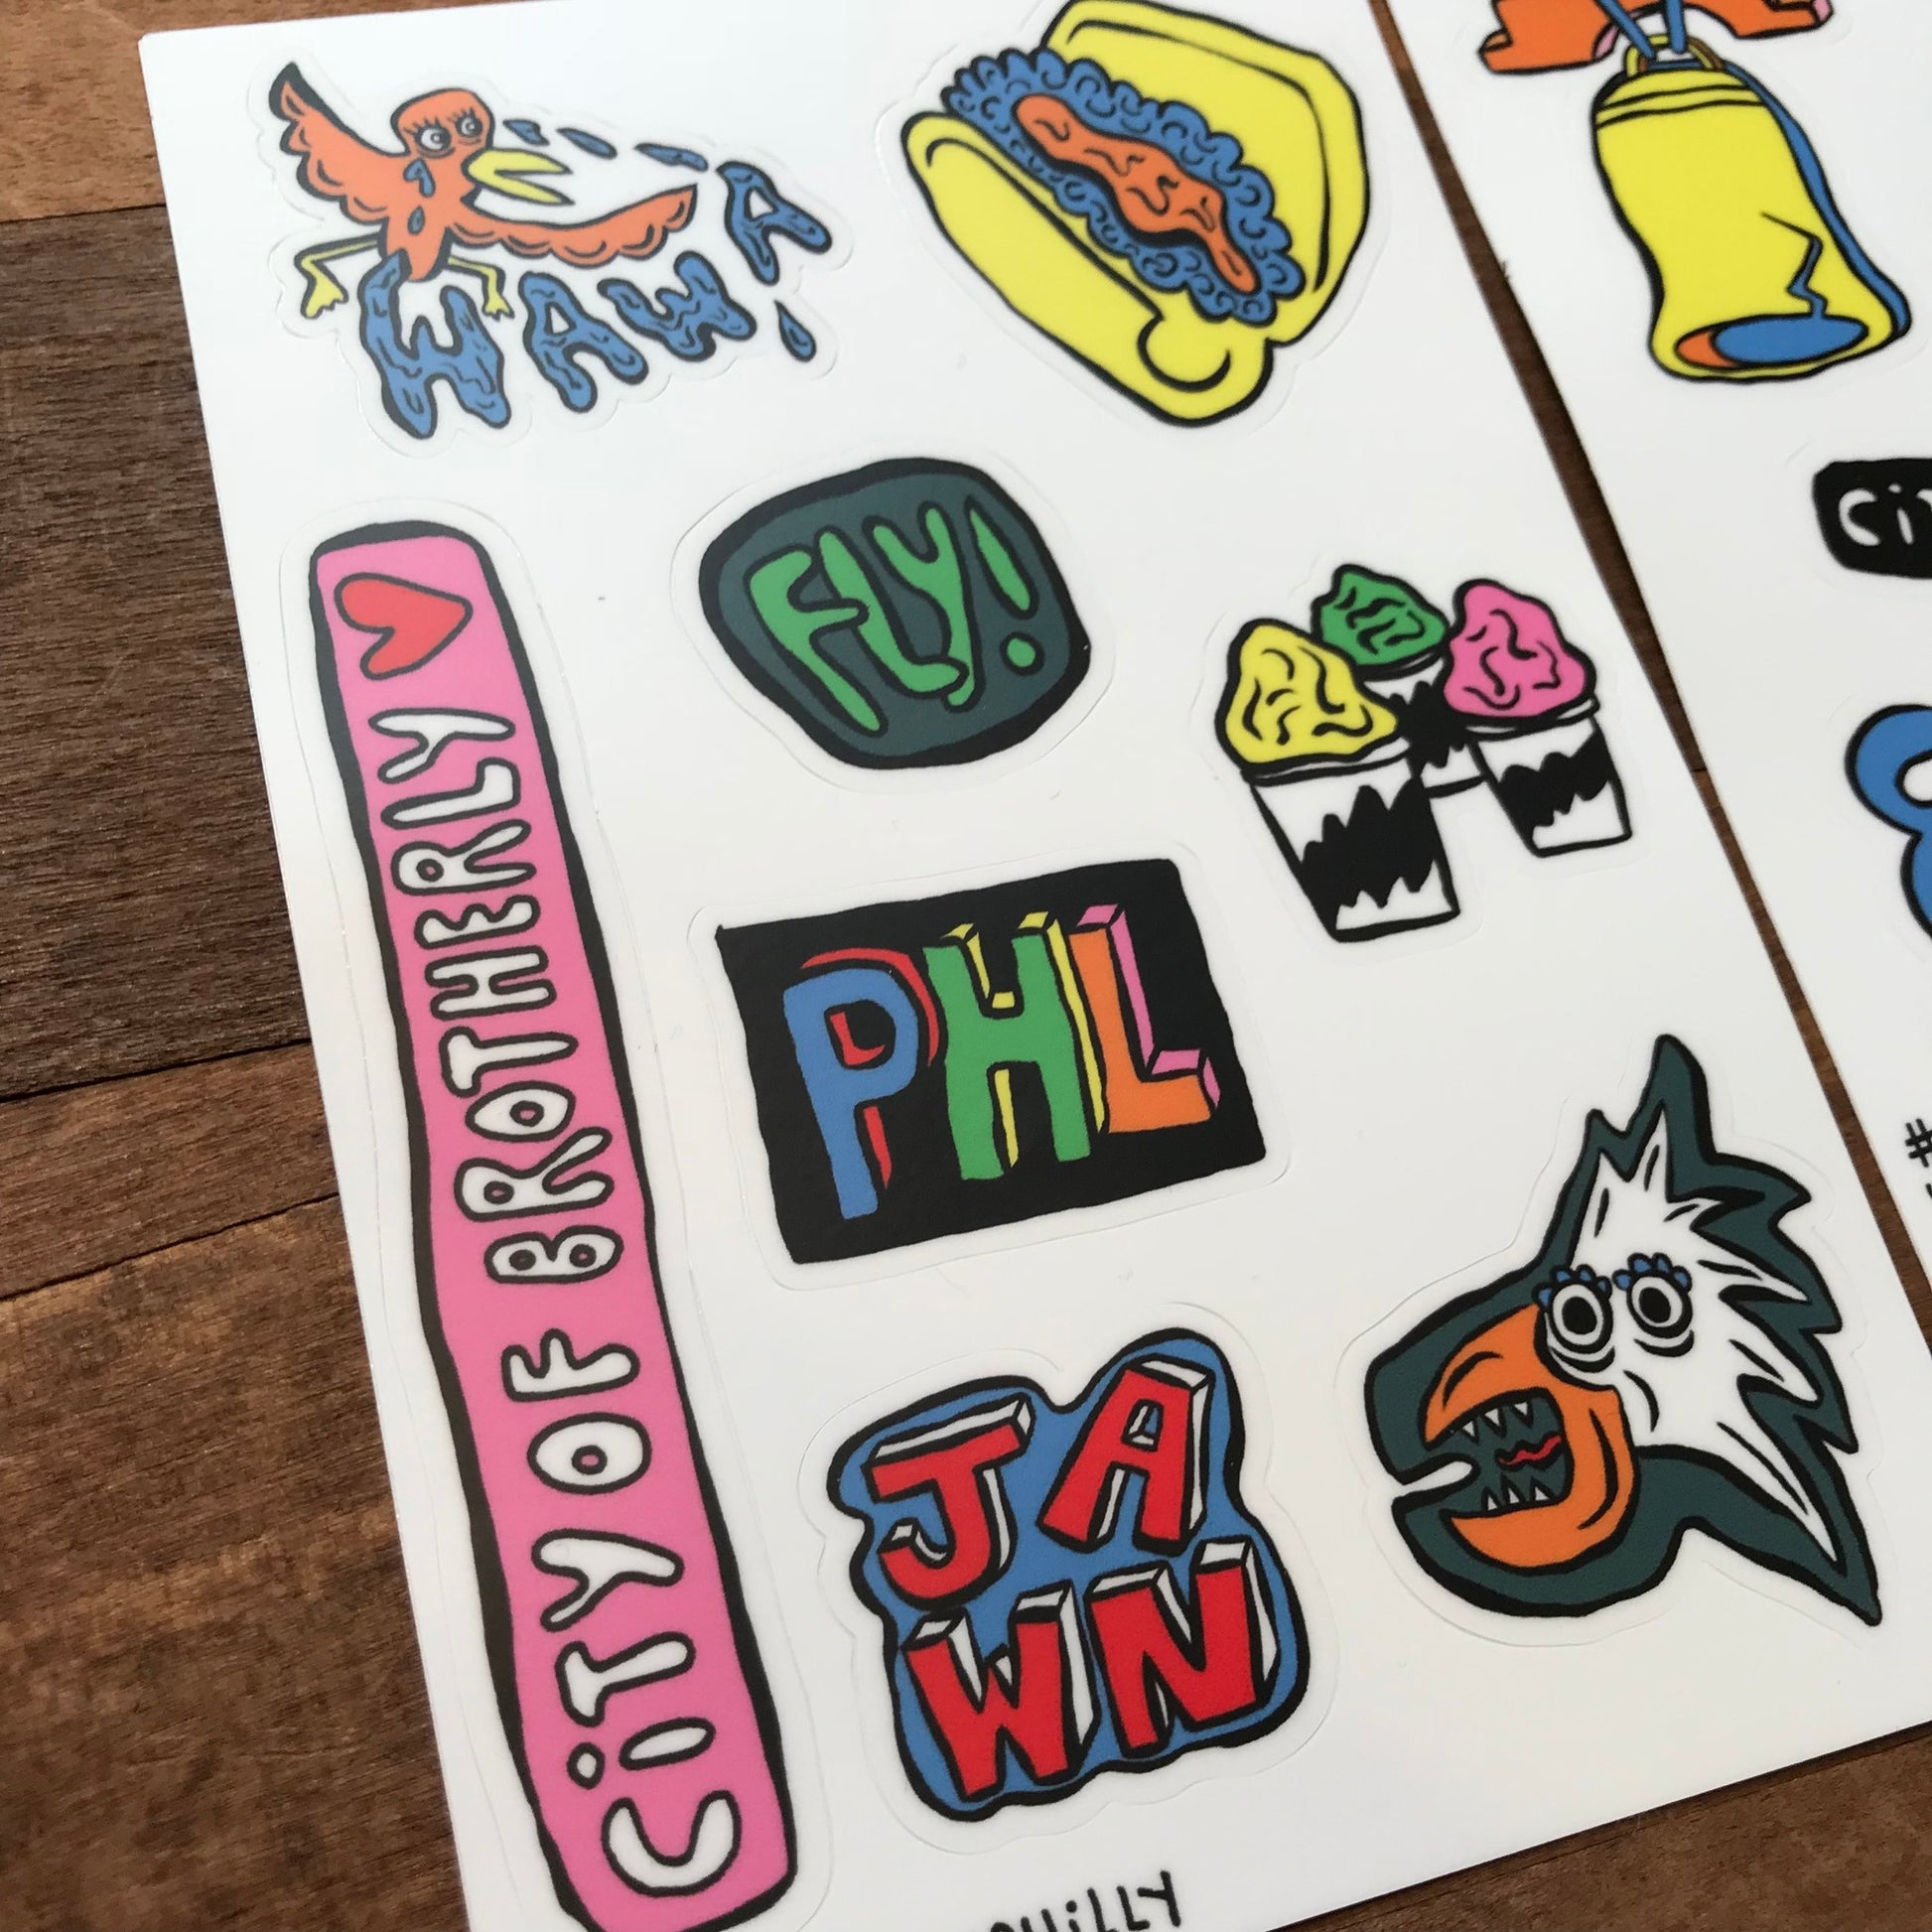 Assorted colorful Philly Sticker Packs with various designs and text, including "city of brotherly phl," "jawn," and a Philly-themed sticker pack featuring "Wawa" on a wood surface by Holly Simple.